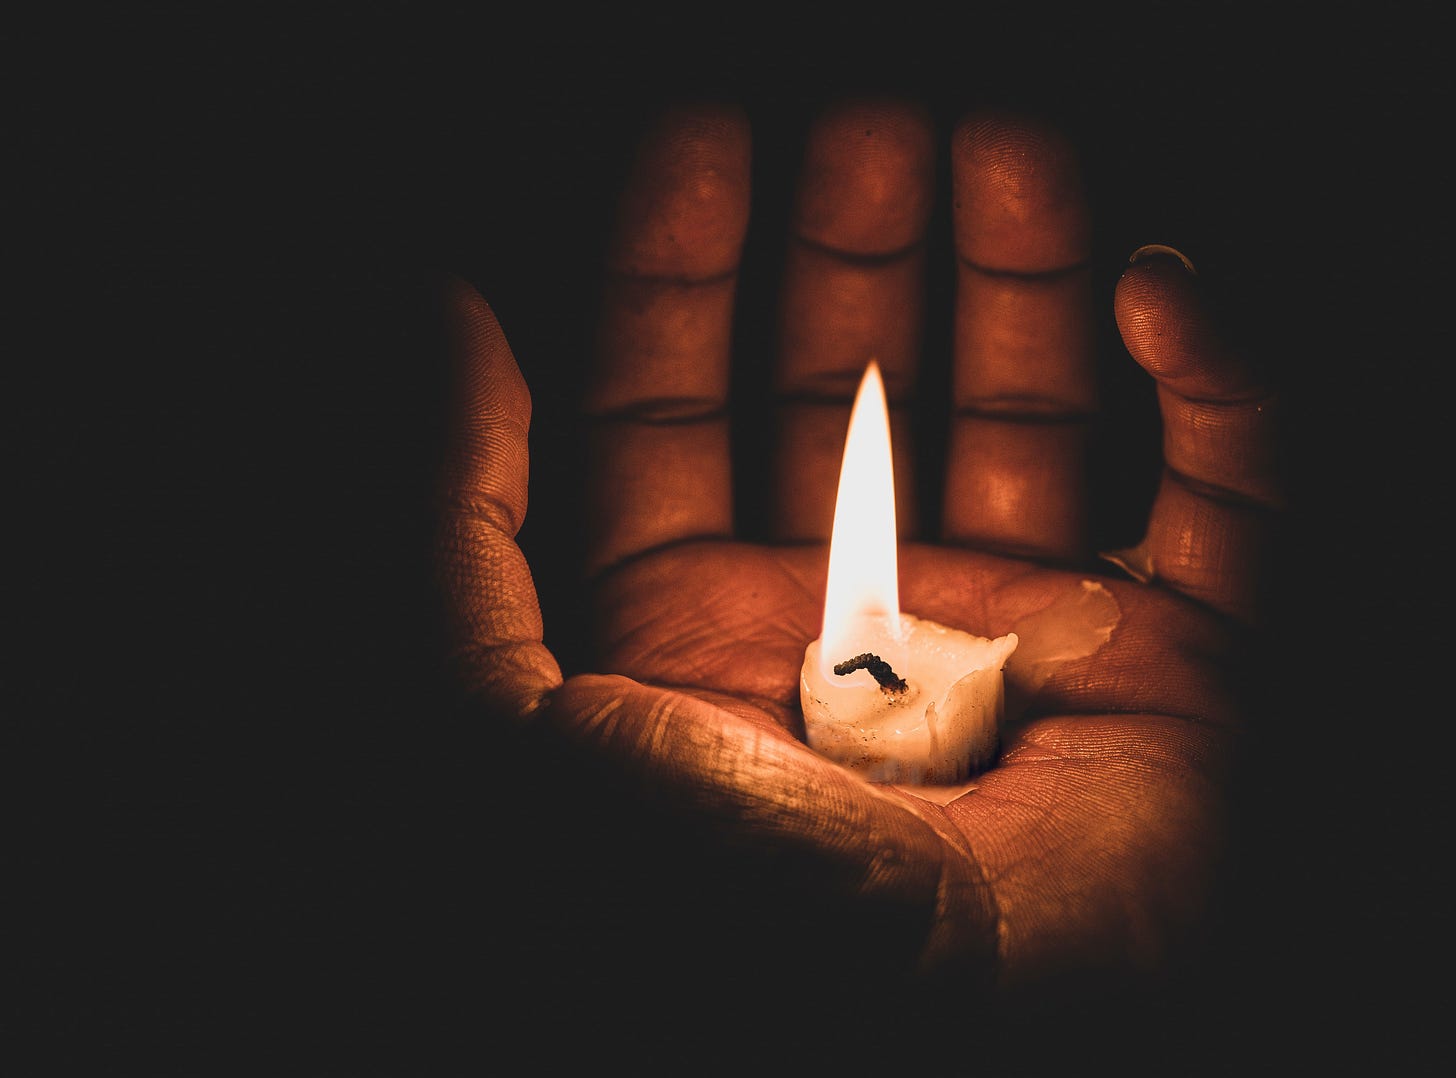 A burning candle sits in the palm of an open hand